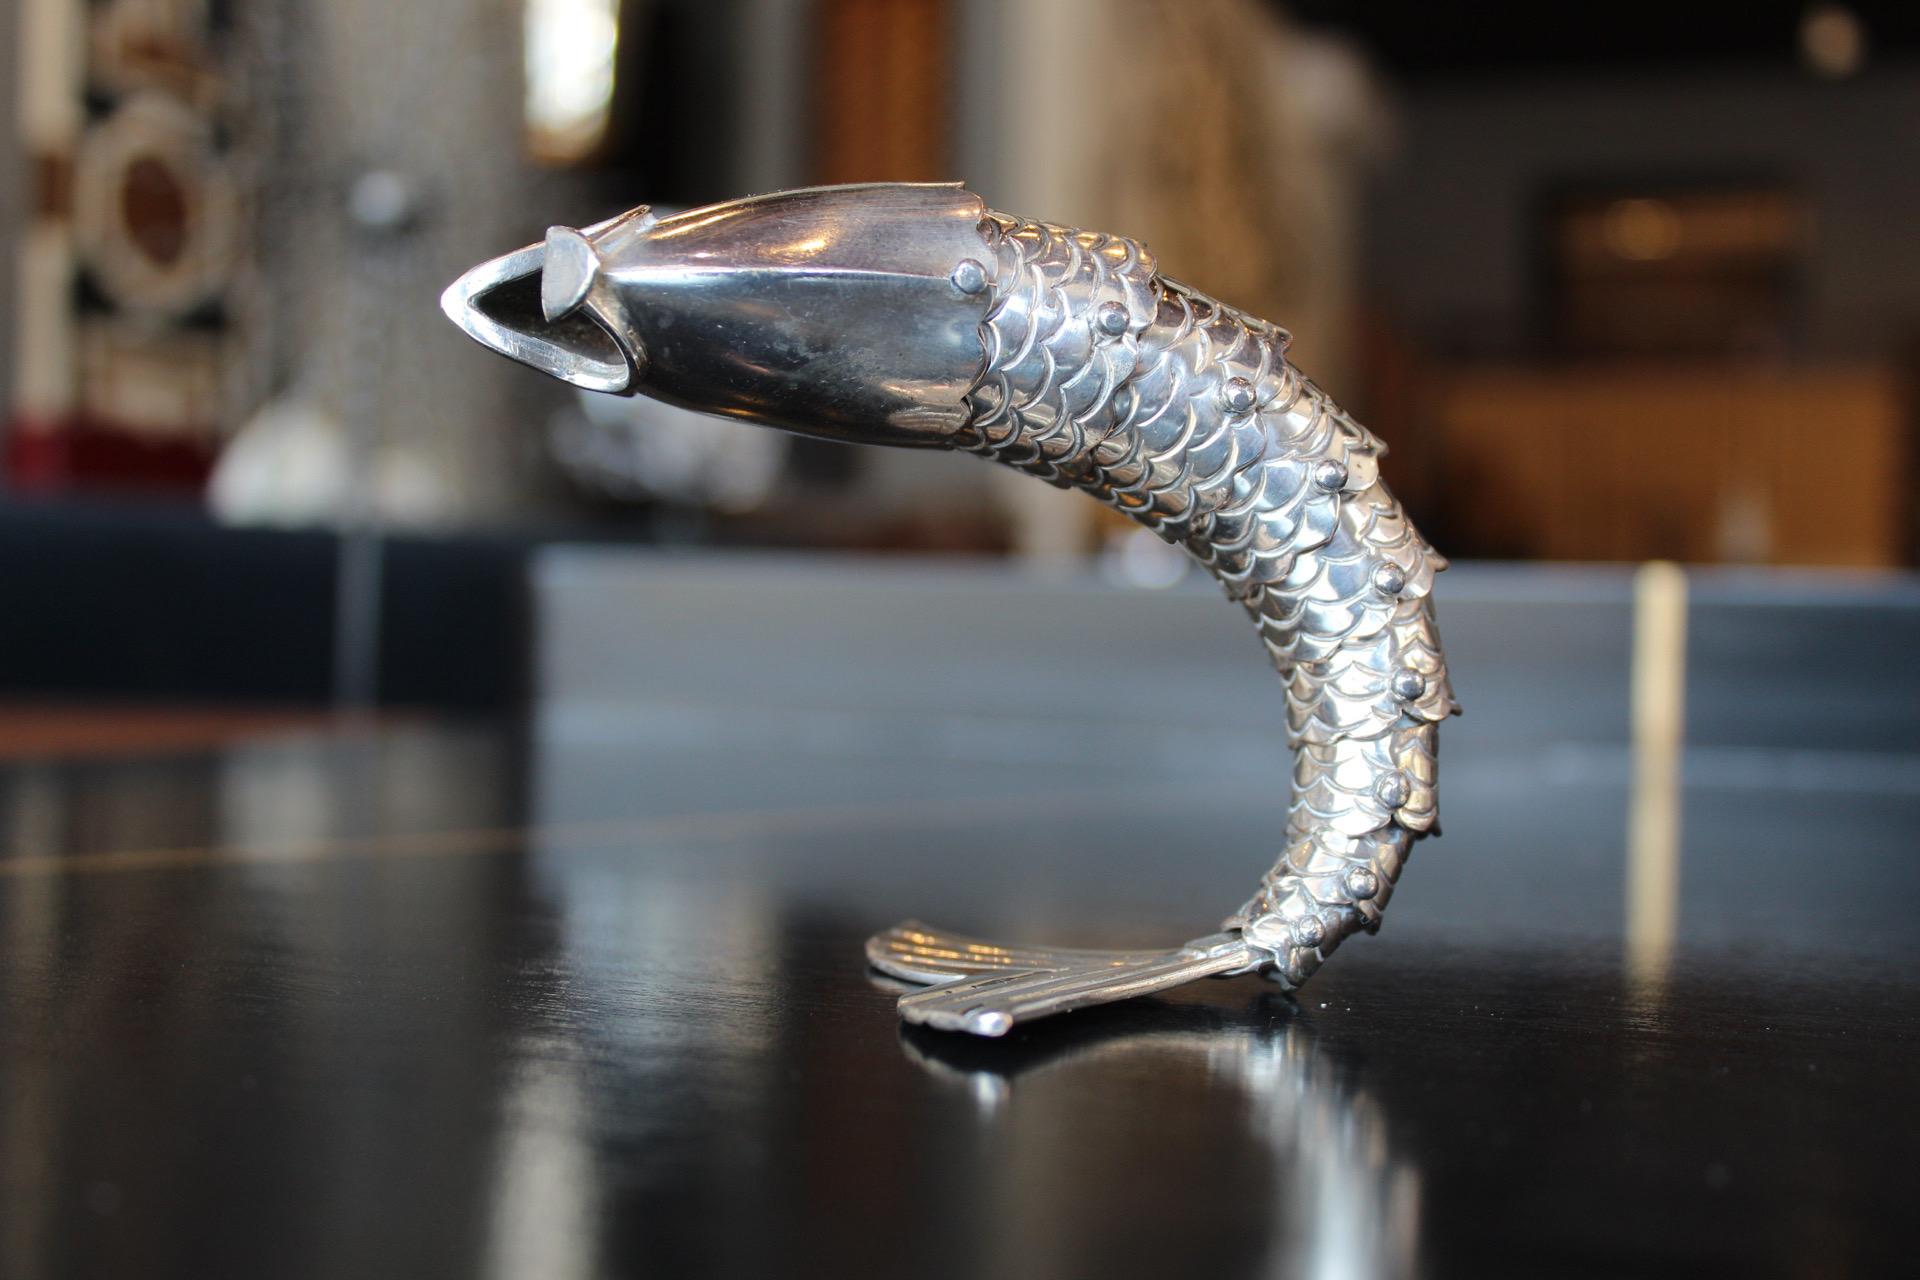 This is an awesome addition to your bar. An articulating fish bottle opener. Piece made by the daughter of Antonio Castillo, a craftsman who developed in the Spratling workshop and left the creative heritage to Emilia.